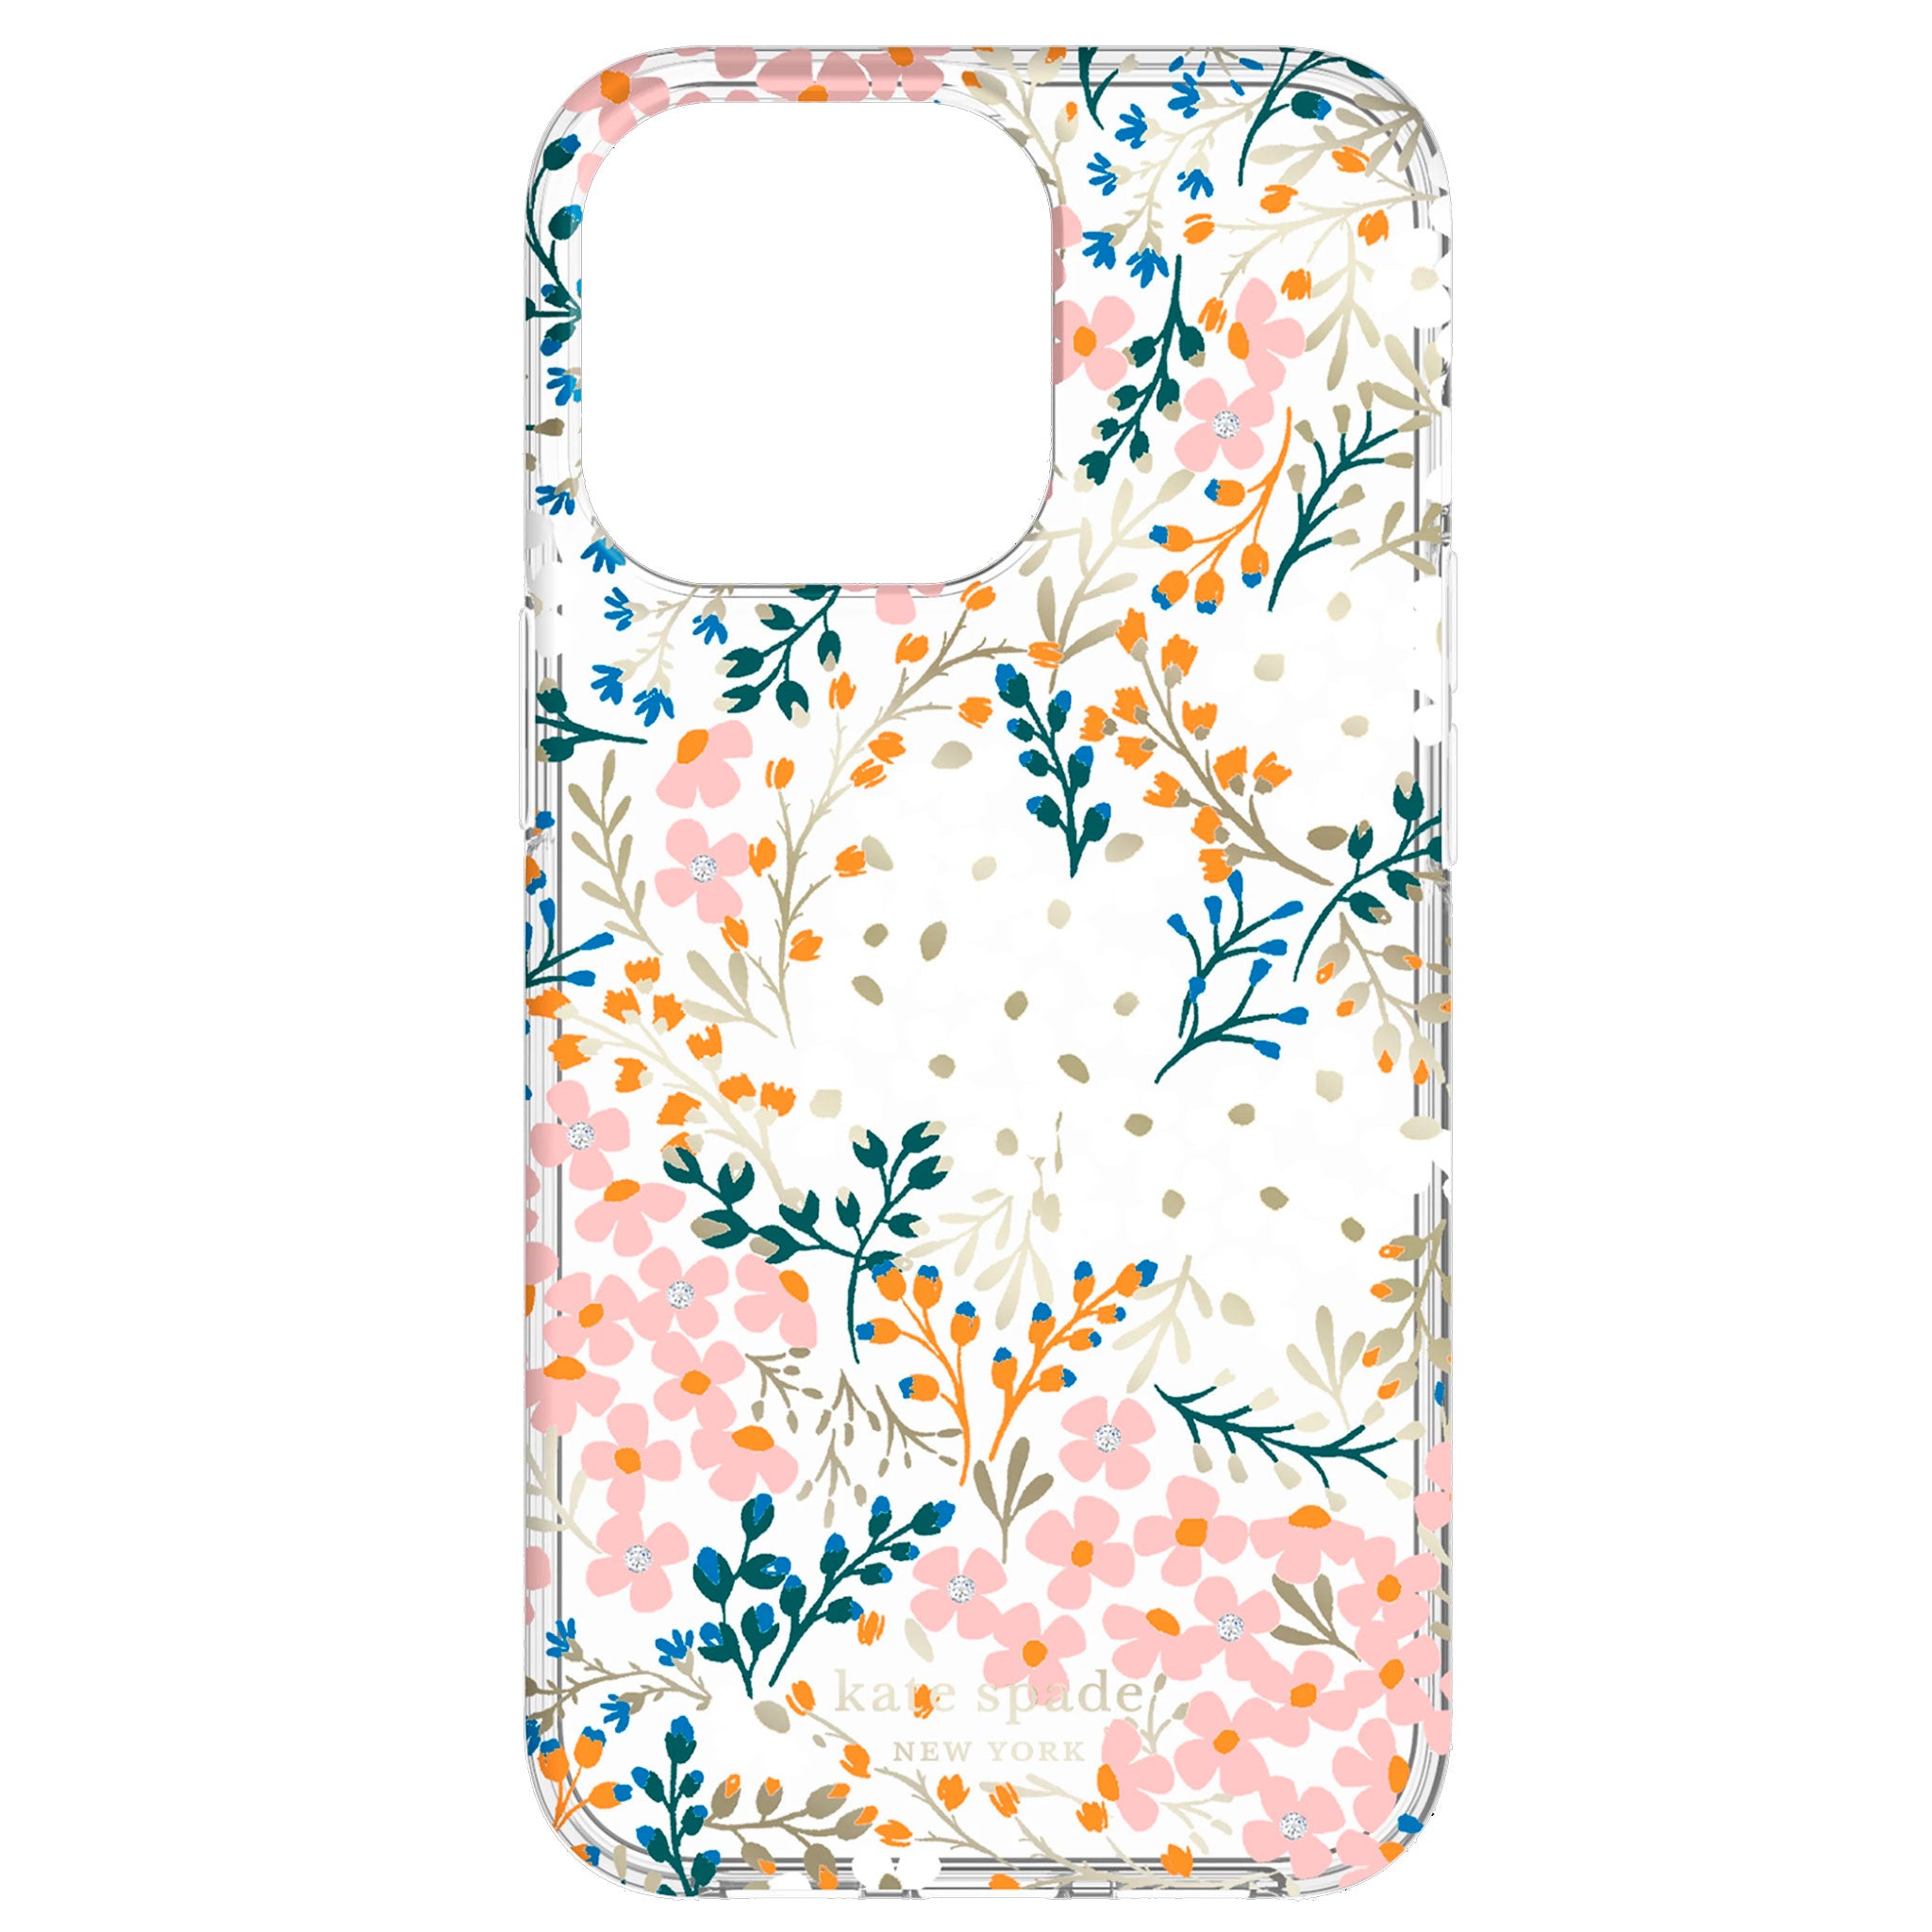 Kate Spade - Hardshell Case For Apple iPhone 13 - Multi Floral Rose And Pacific Green